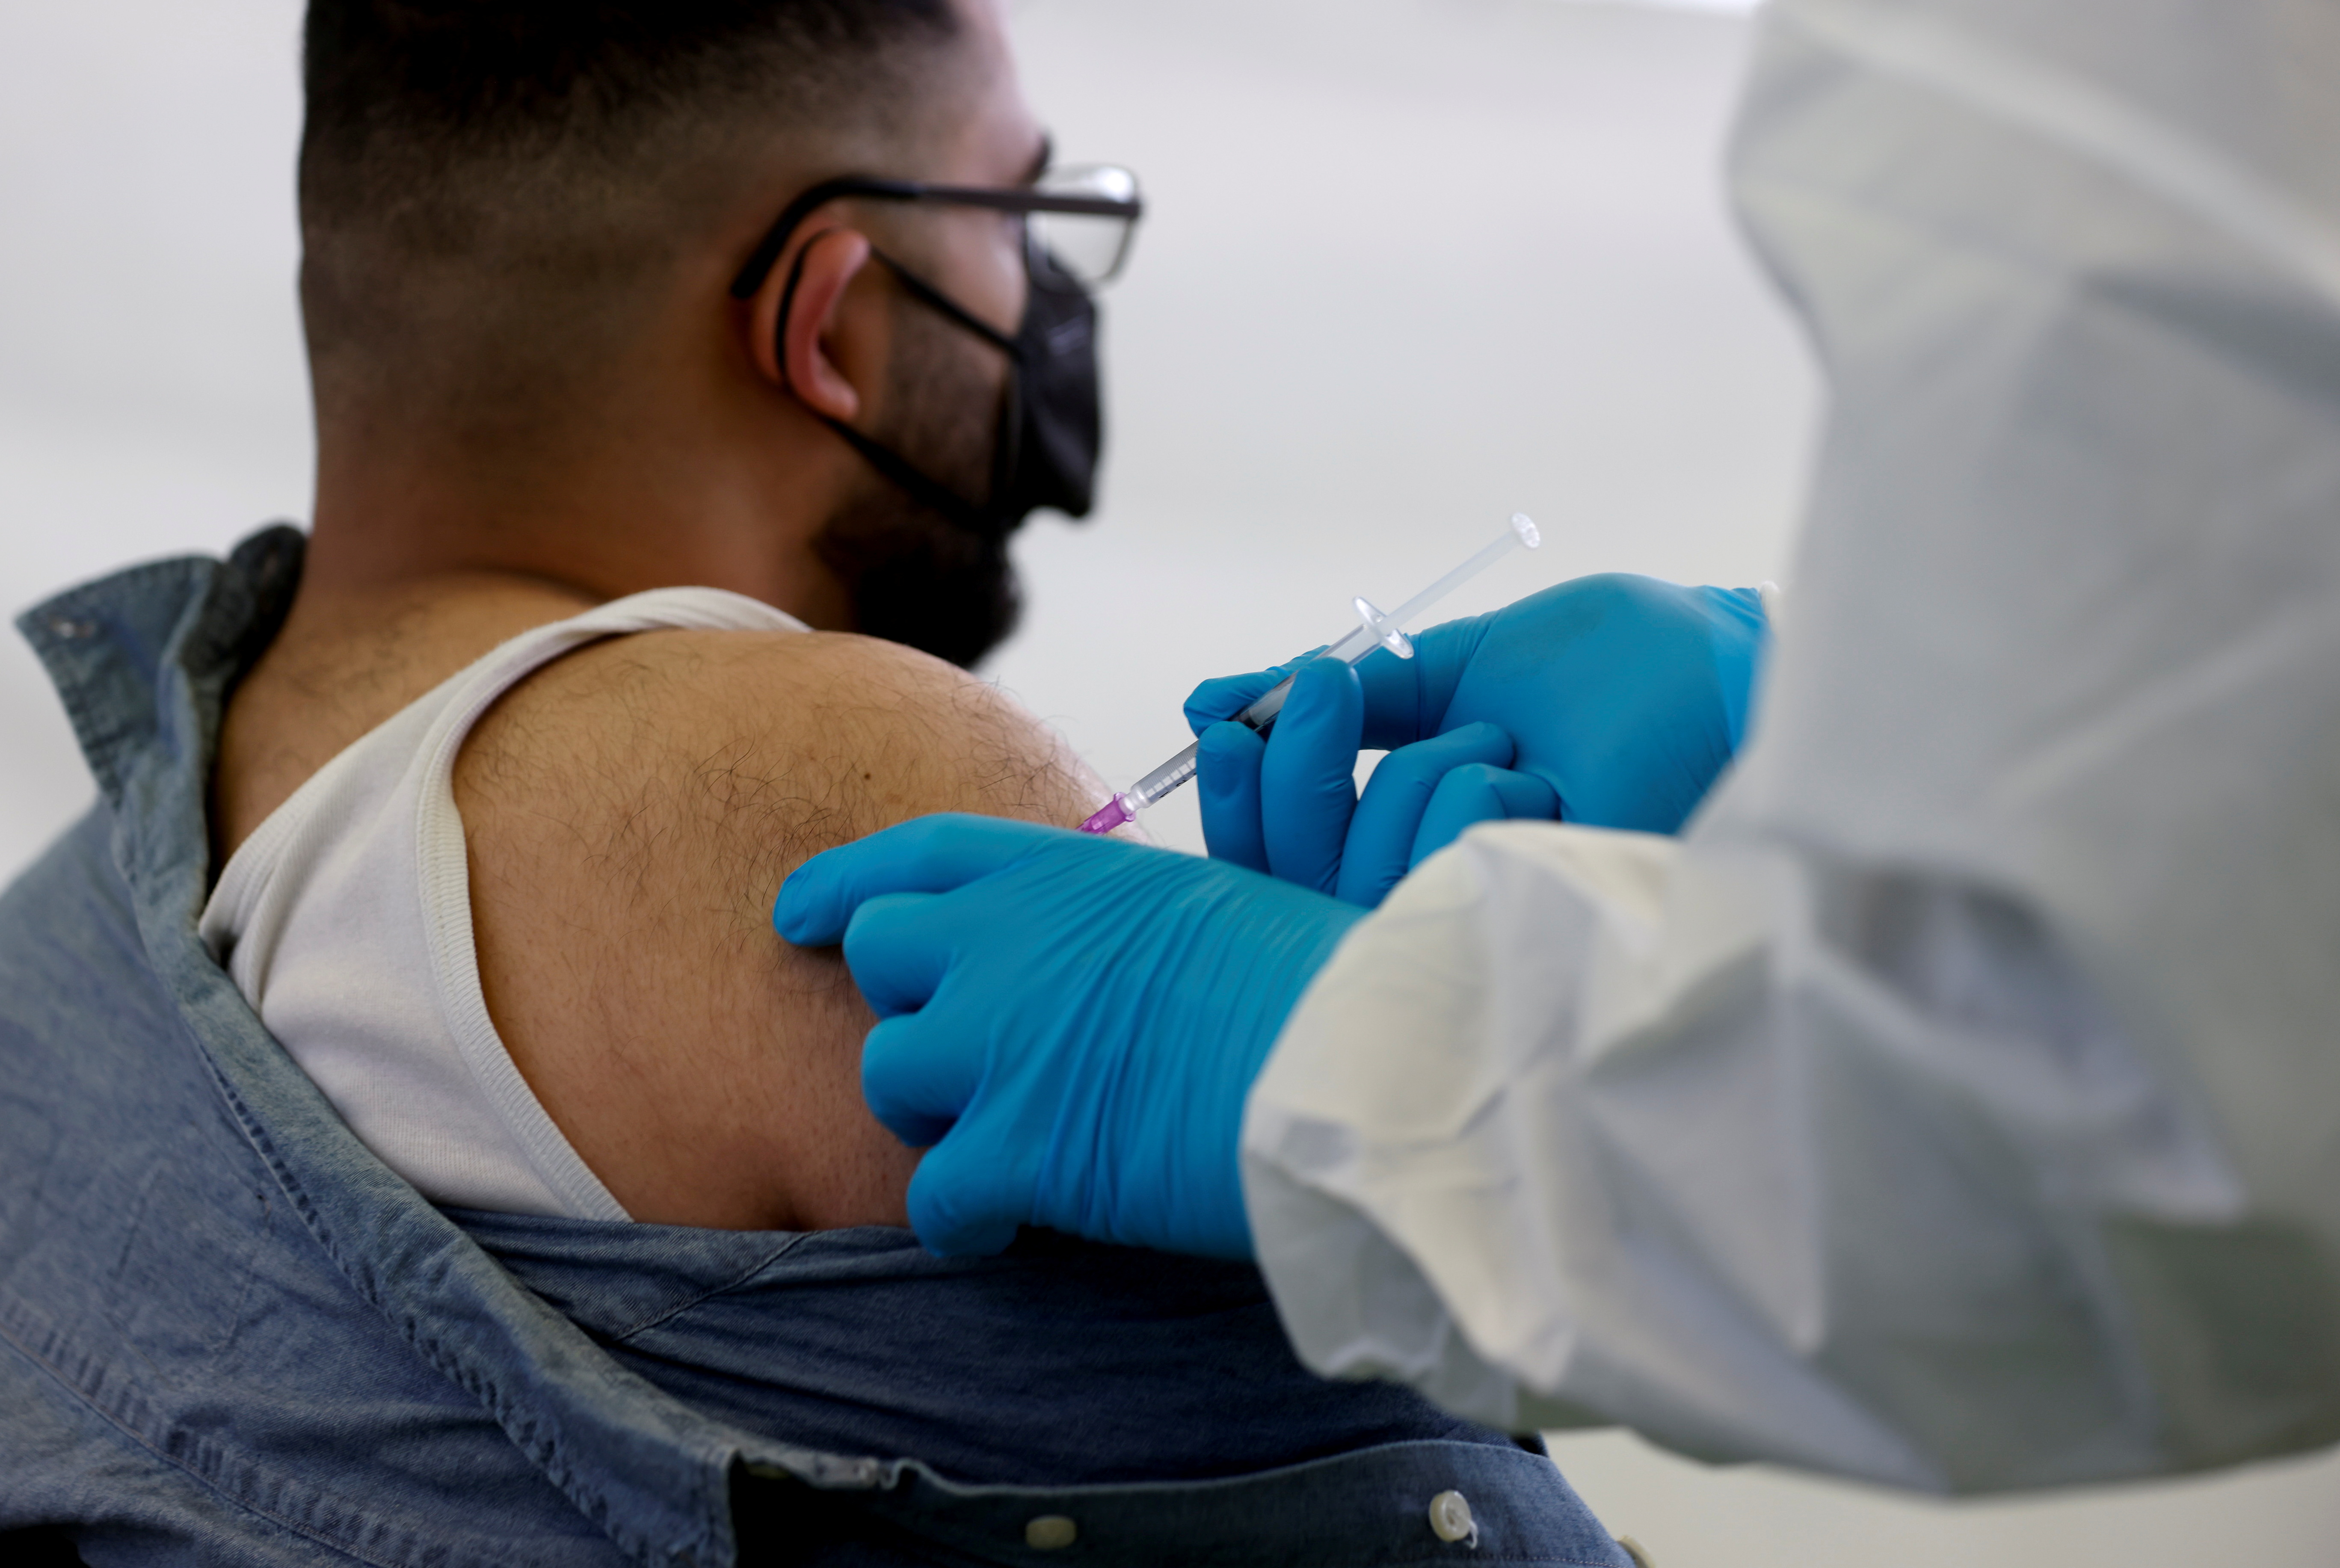 A person receives a vaccine against the coronavirus disease (COVID-19) at a sports hall in Berlin, Germany, May 14, 2021. REUTERS/Axel Schmidt/File Photo